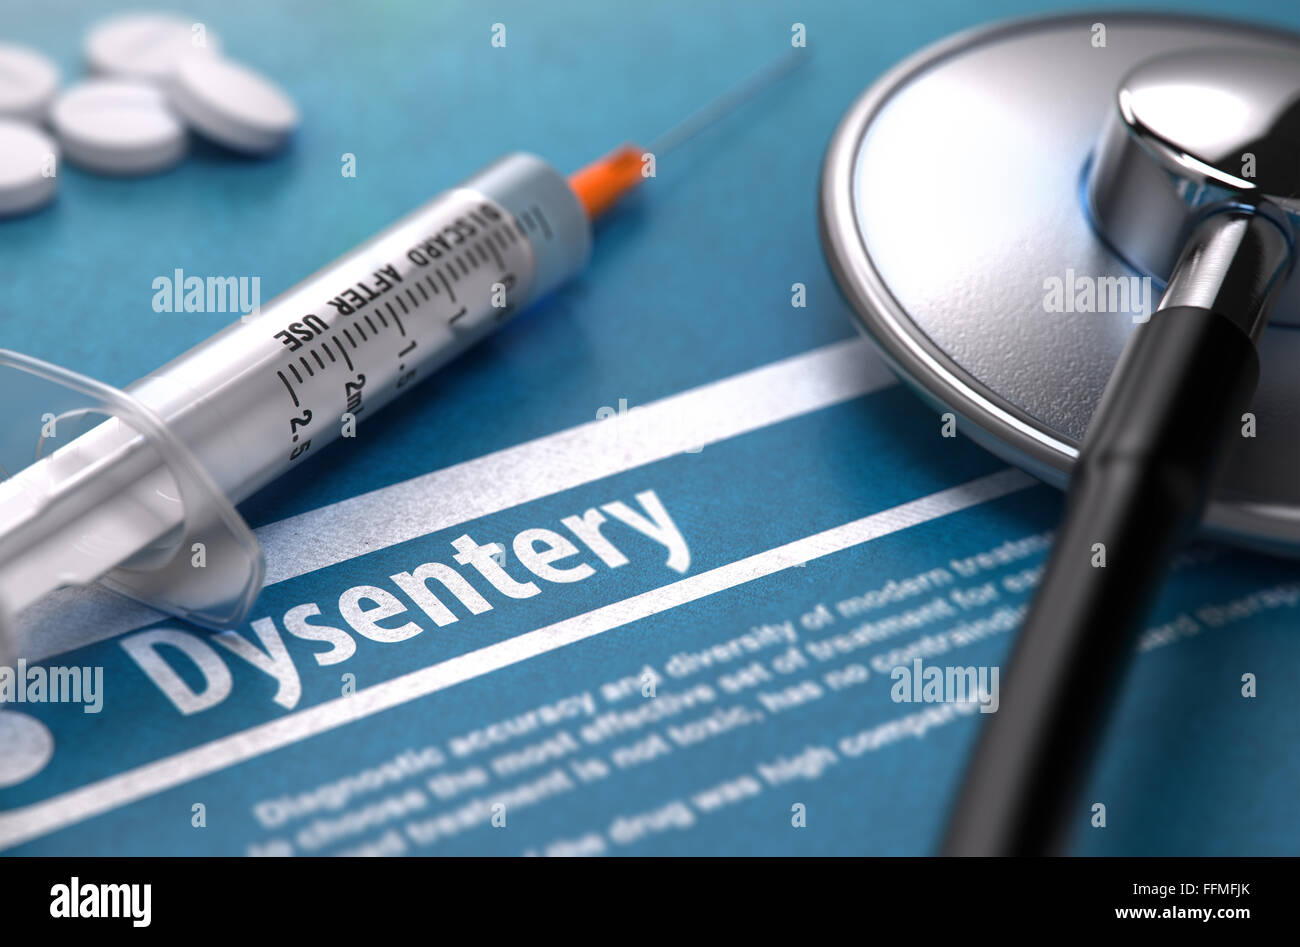 Dysentery. Medical Concept on Blue Background. Stock Photo